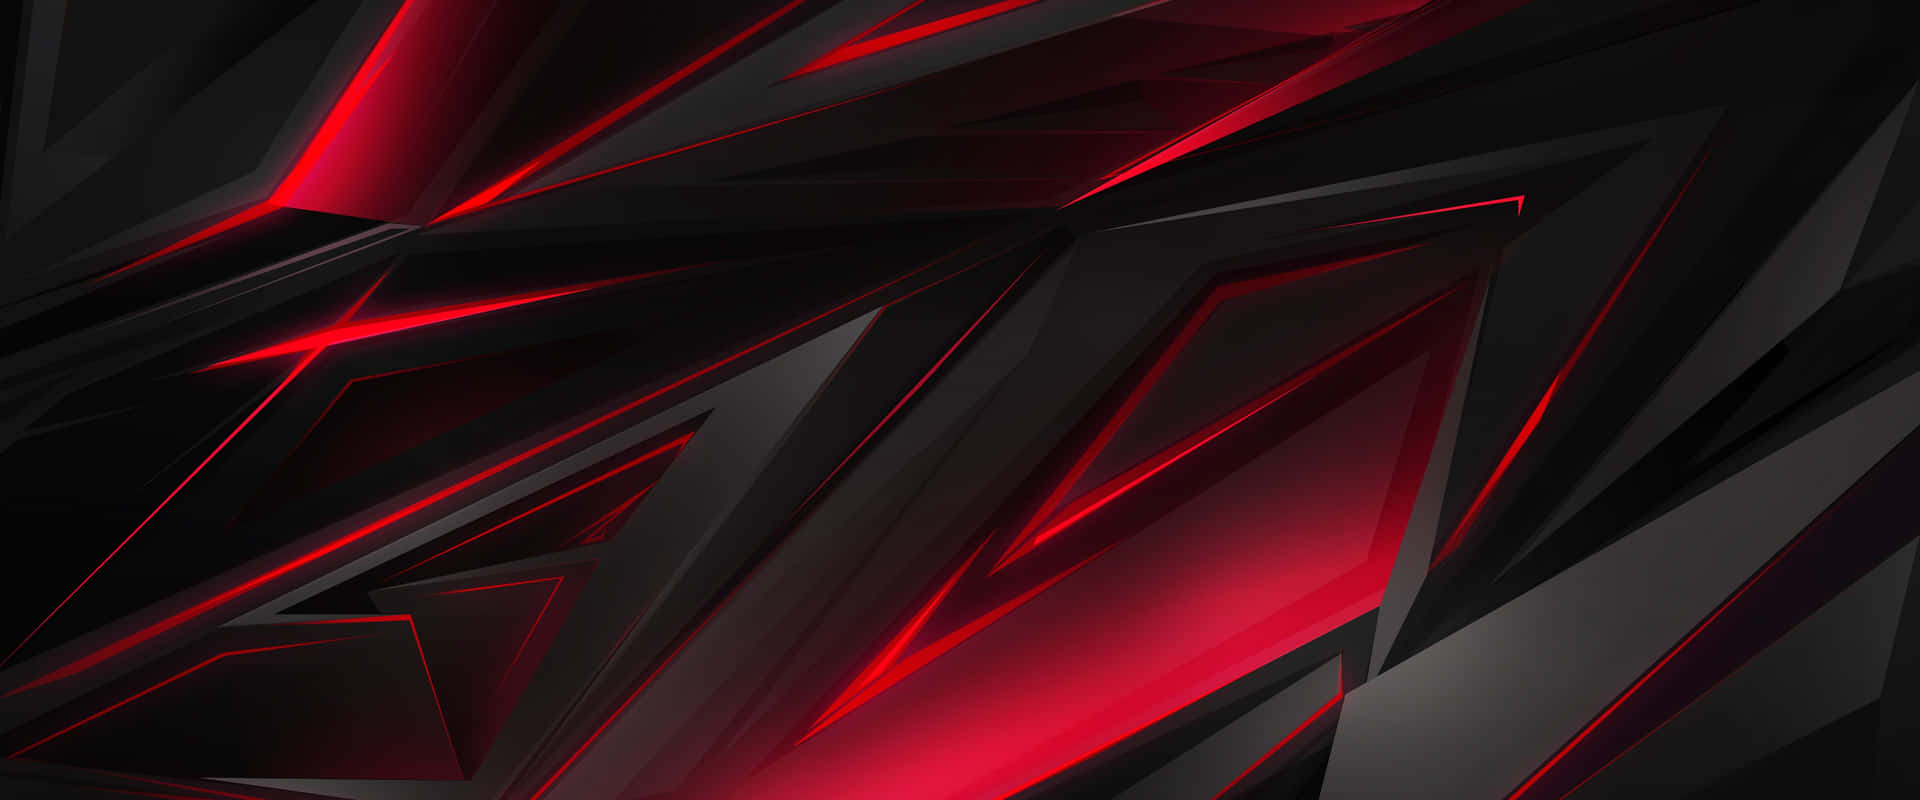 Black And Red Gaming Wallpaper